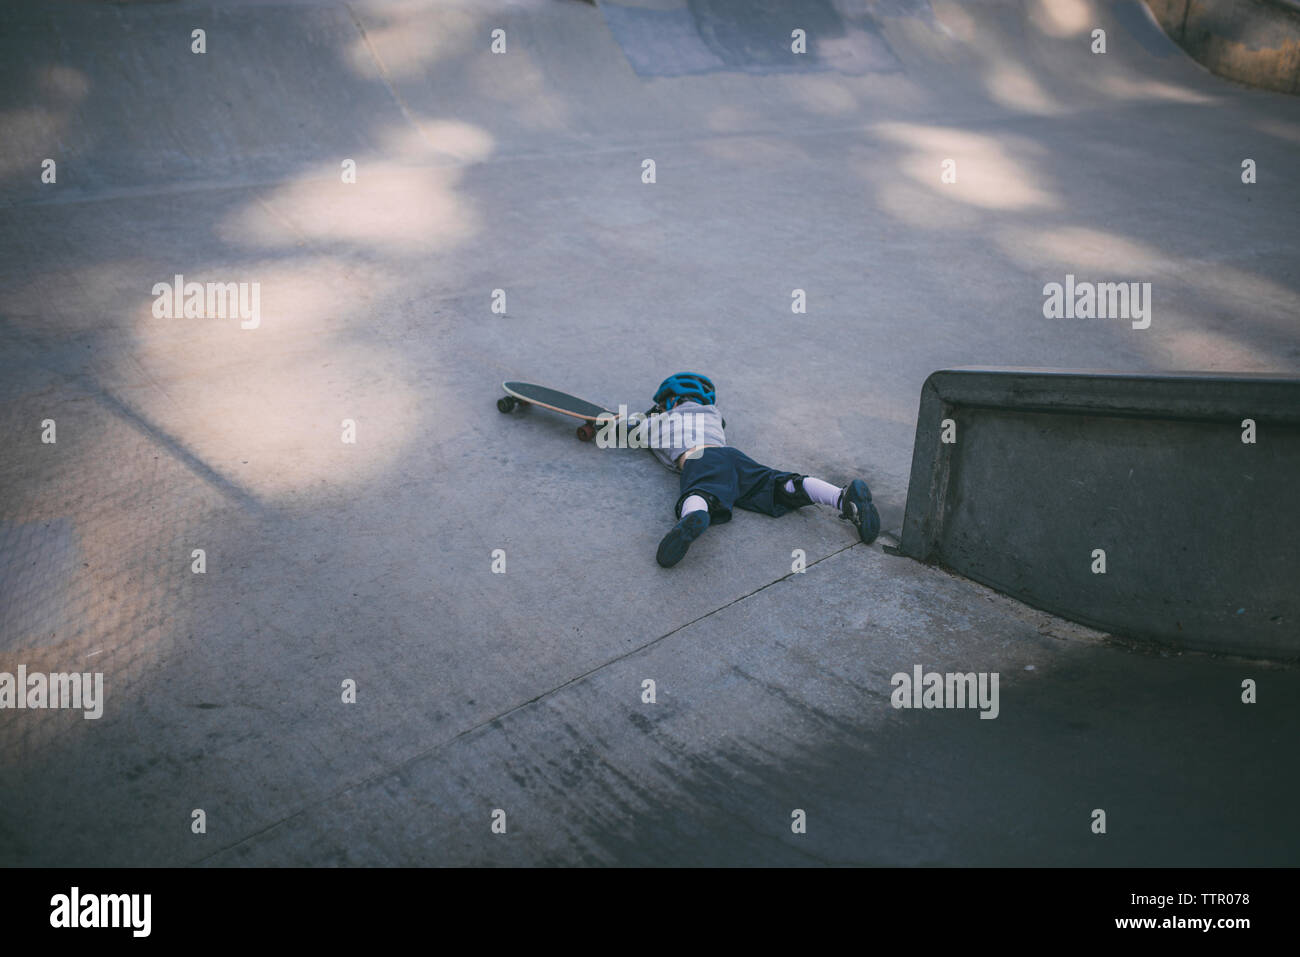 High angle view of boy falling from skateboard at park Stock Photo